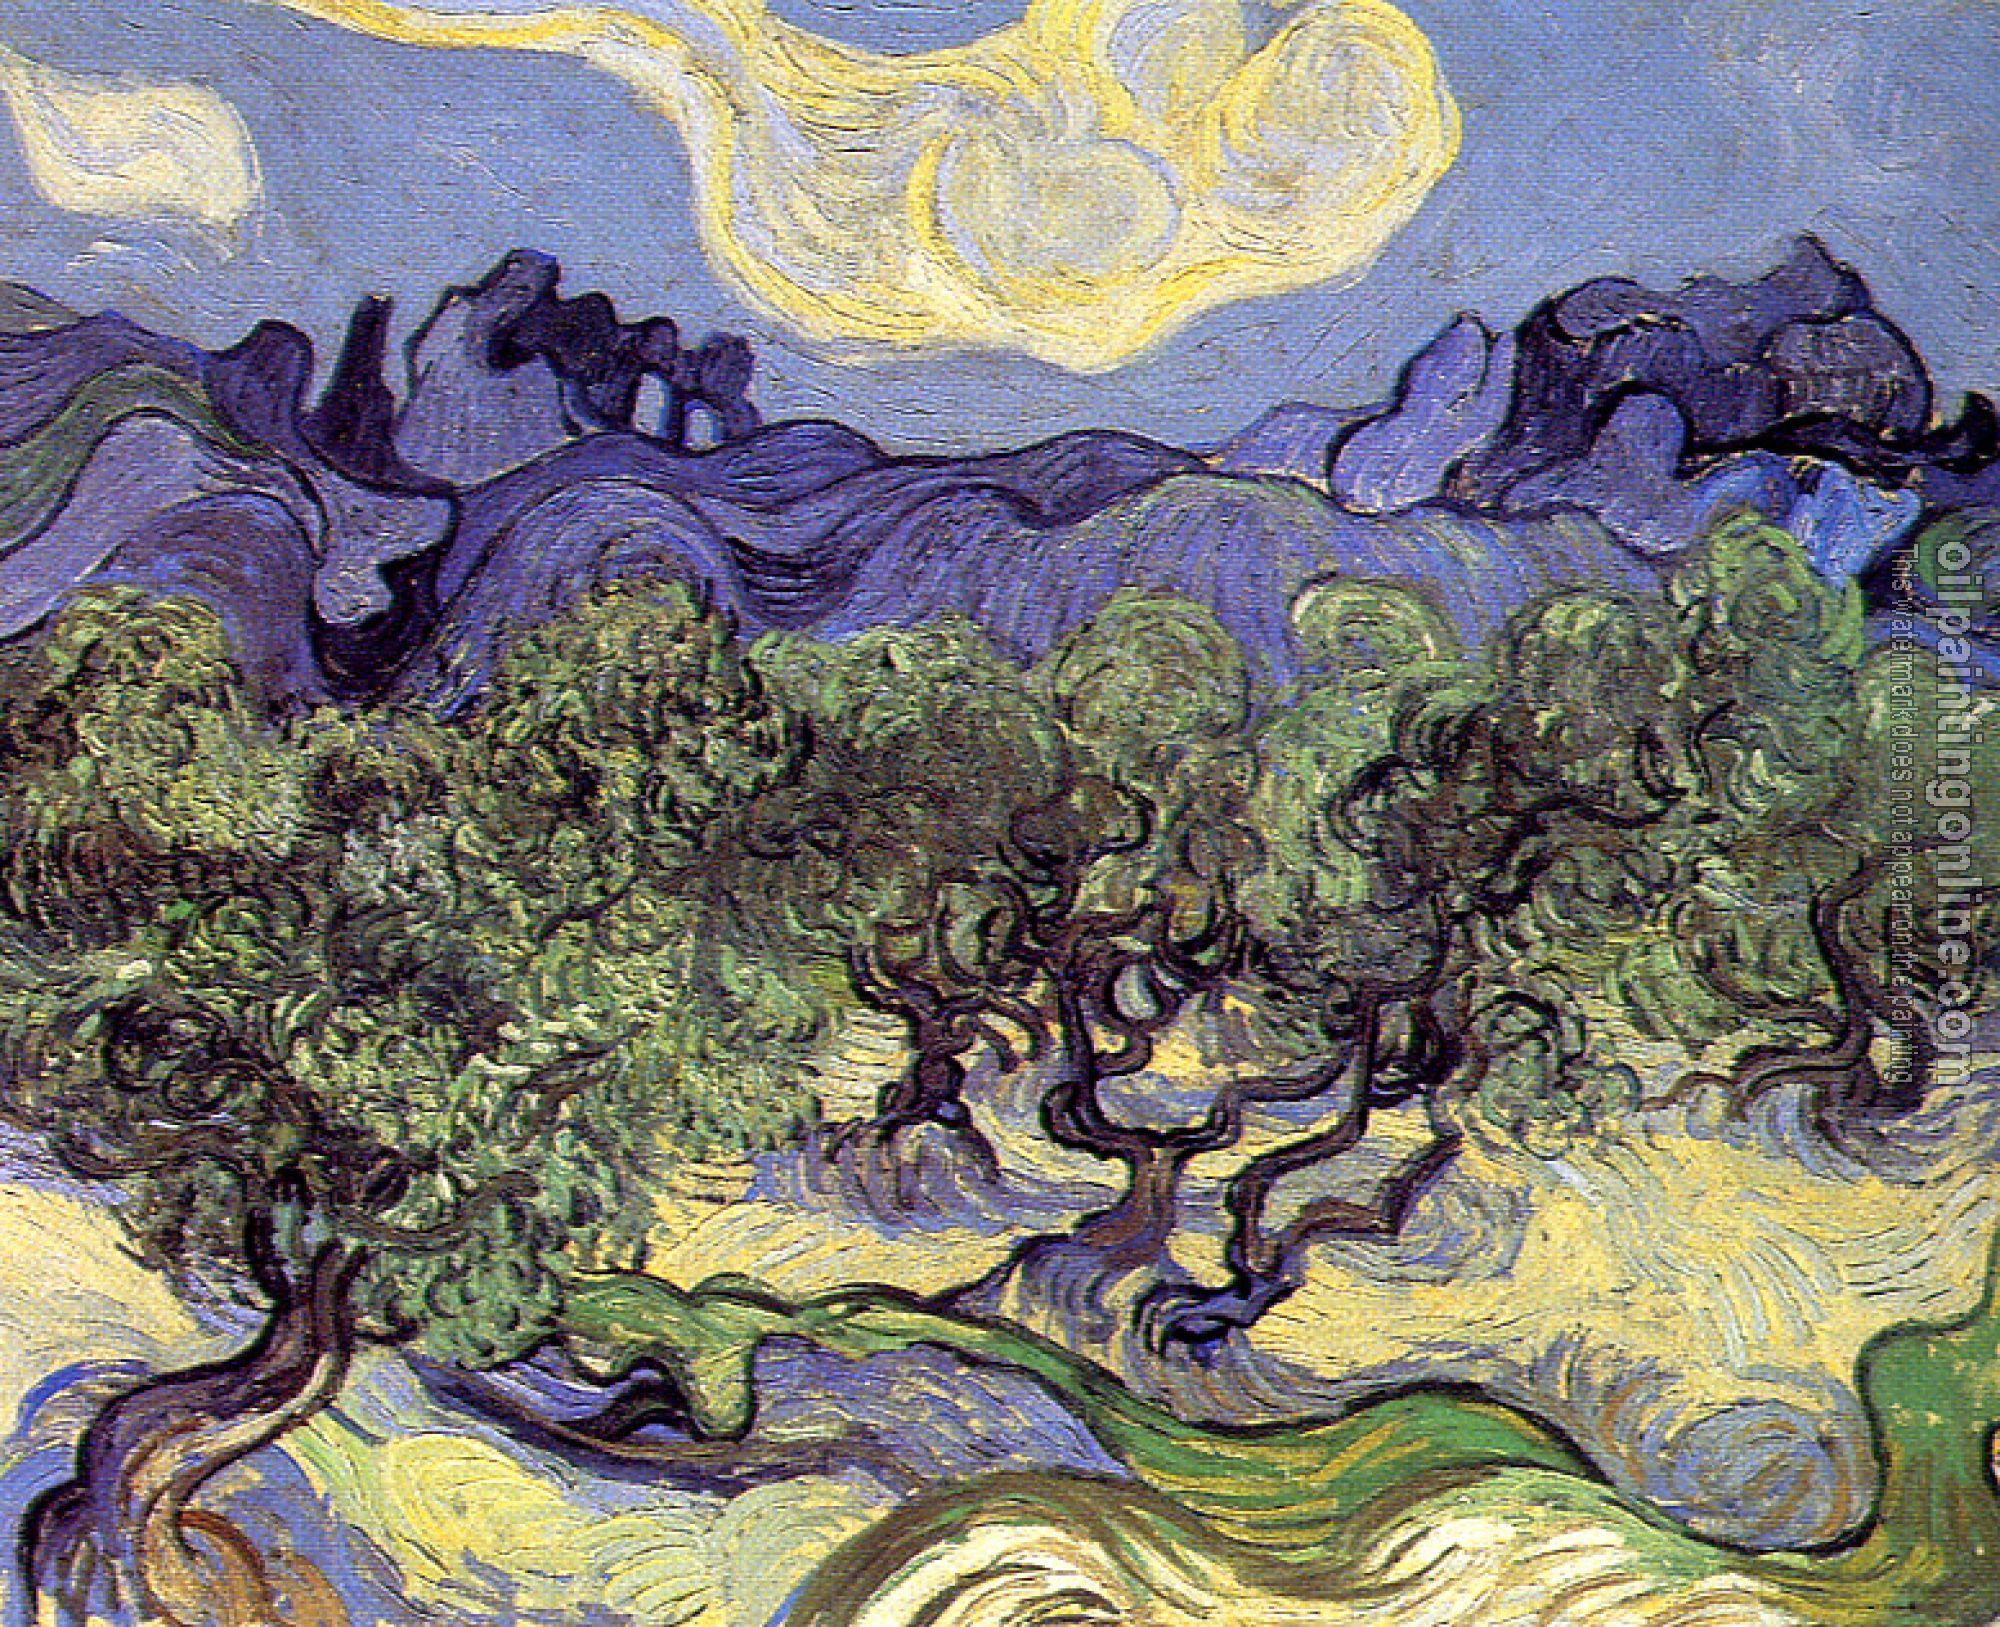 Gogh, Vincent van - Olive Trees in a Mountain Landscape